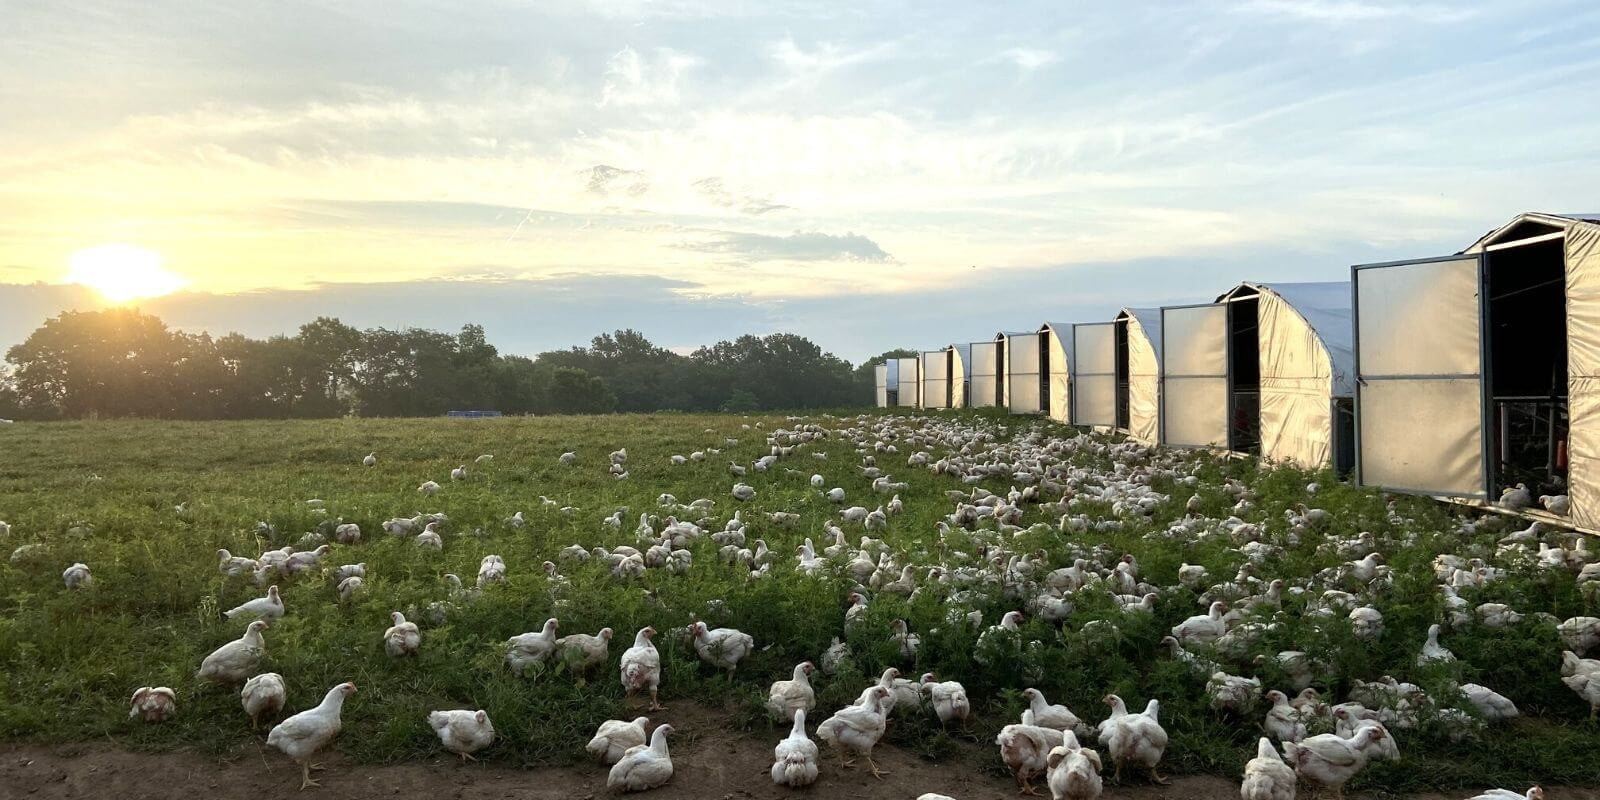 What are the main design contents of the large-scale chicken farm construction project?(1)